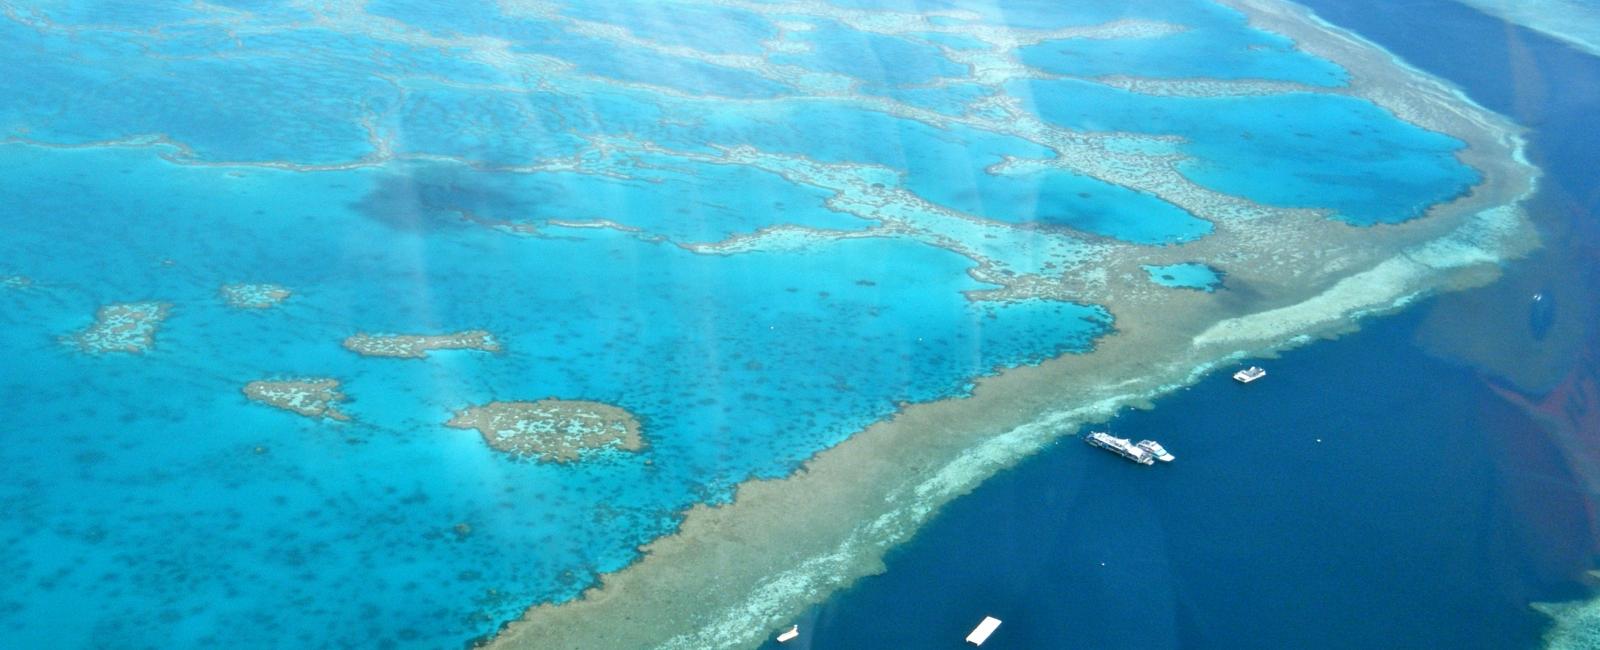 The largest living structure on earth is the great barrier reef found in australia it is over 2000 kilometers long